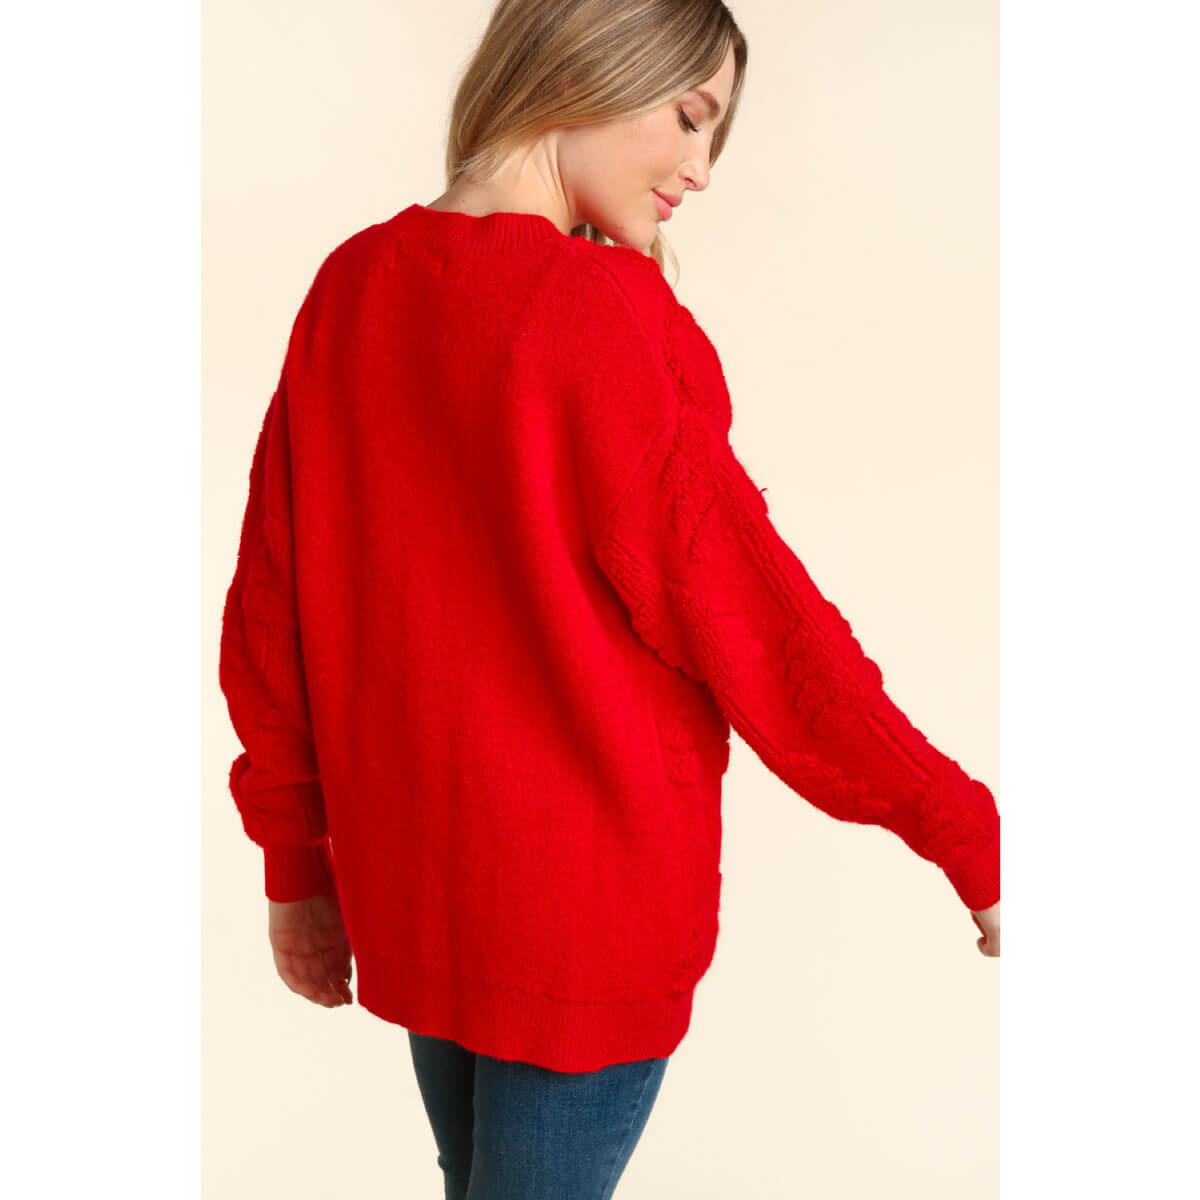 Pearl Holiday Tree Oversized Sweater red back  | MILK MONEY milkmoney.co | cute tops for women. trendy tops for women. cute blouses for women. stylish tops for women. pretty womens tops.